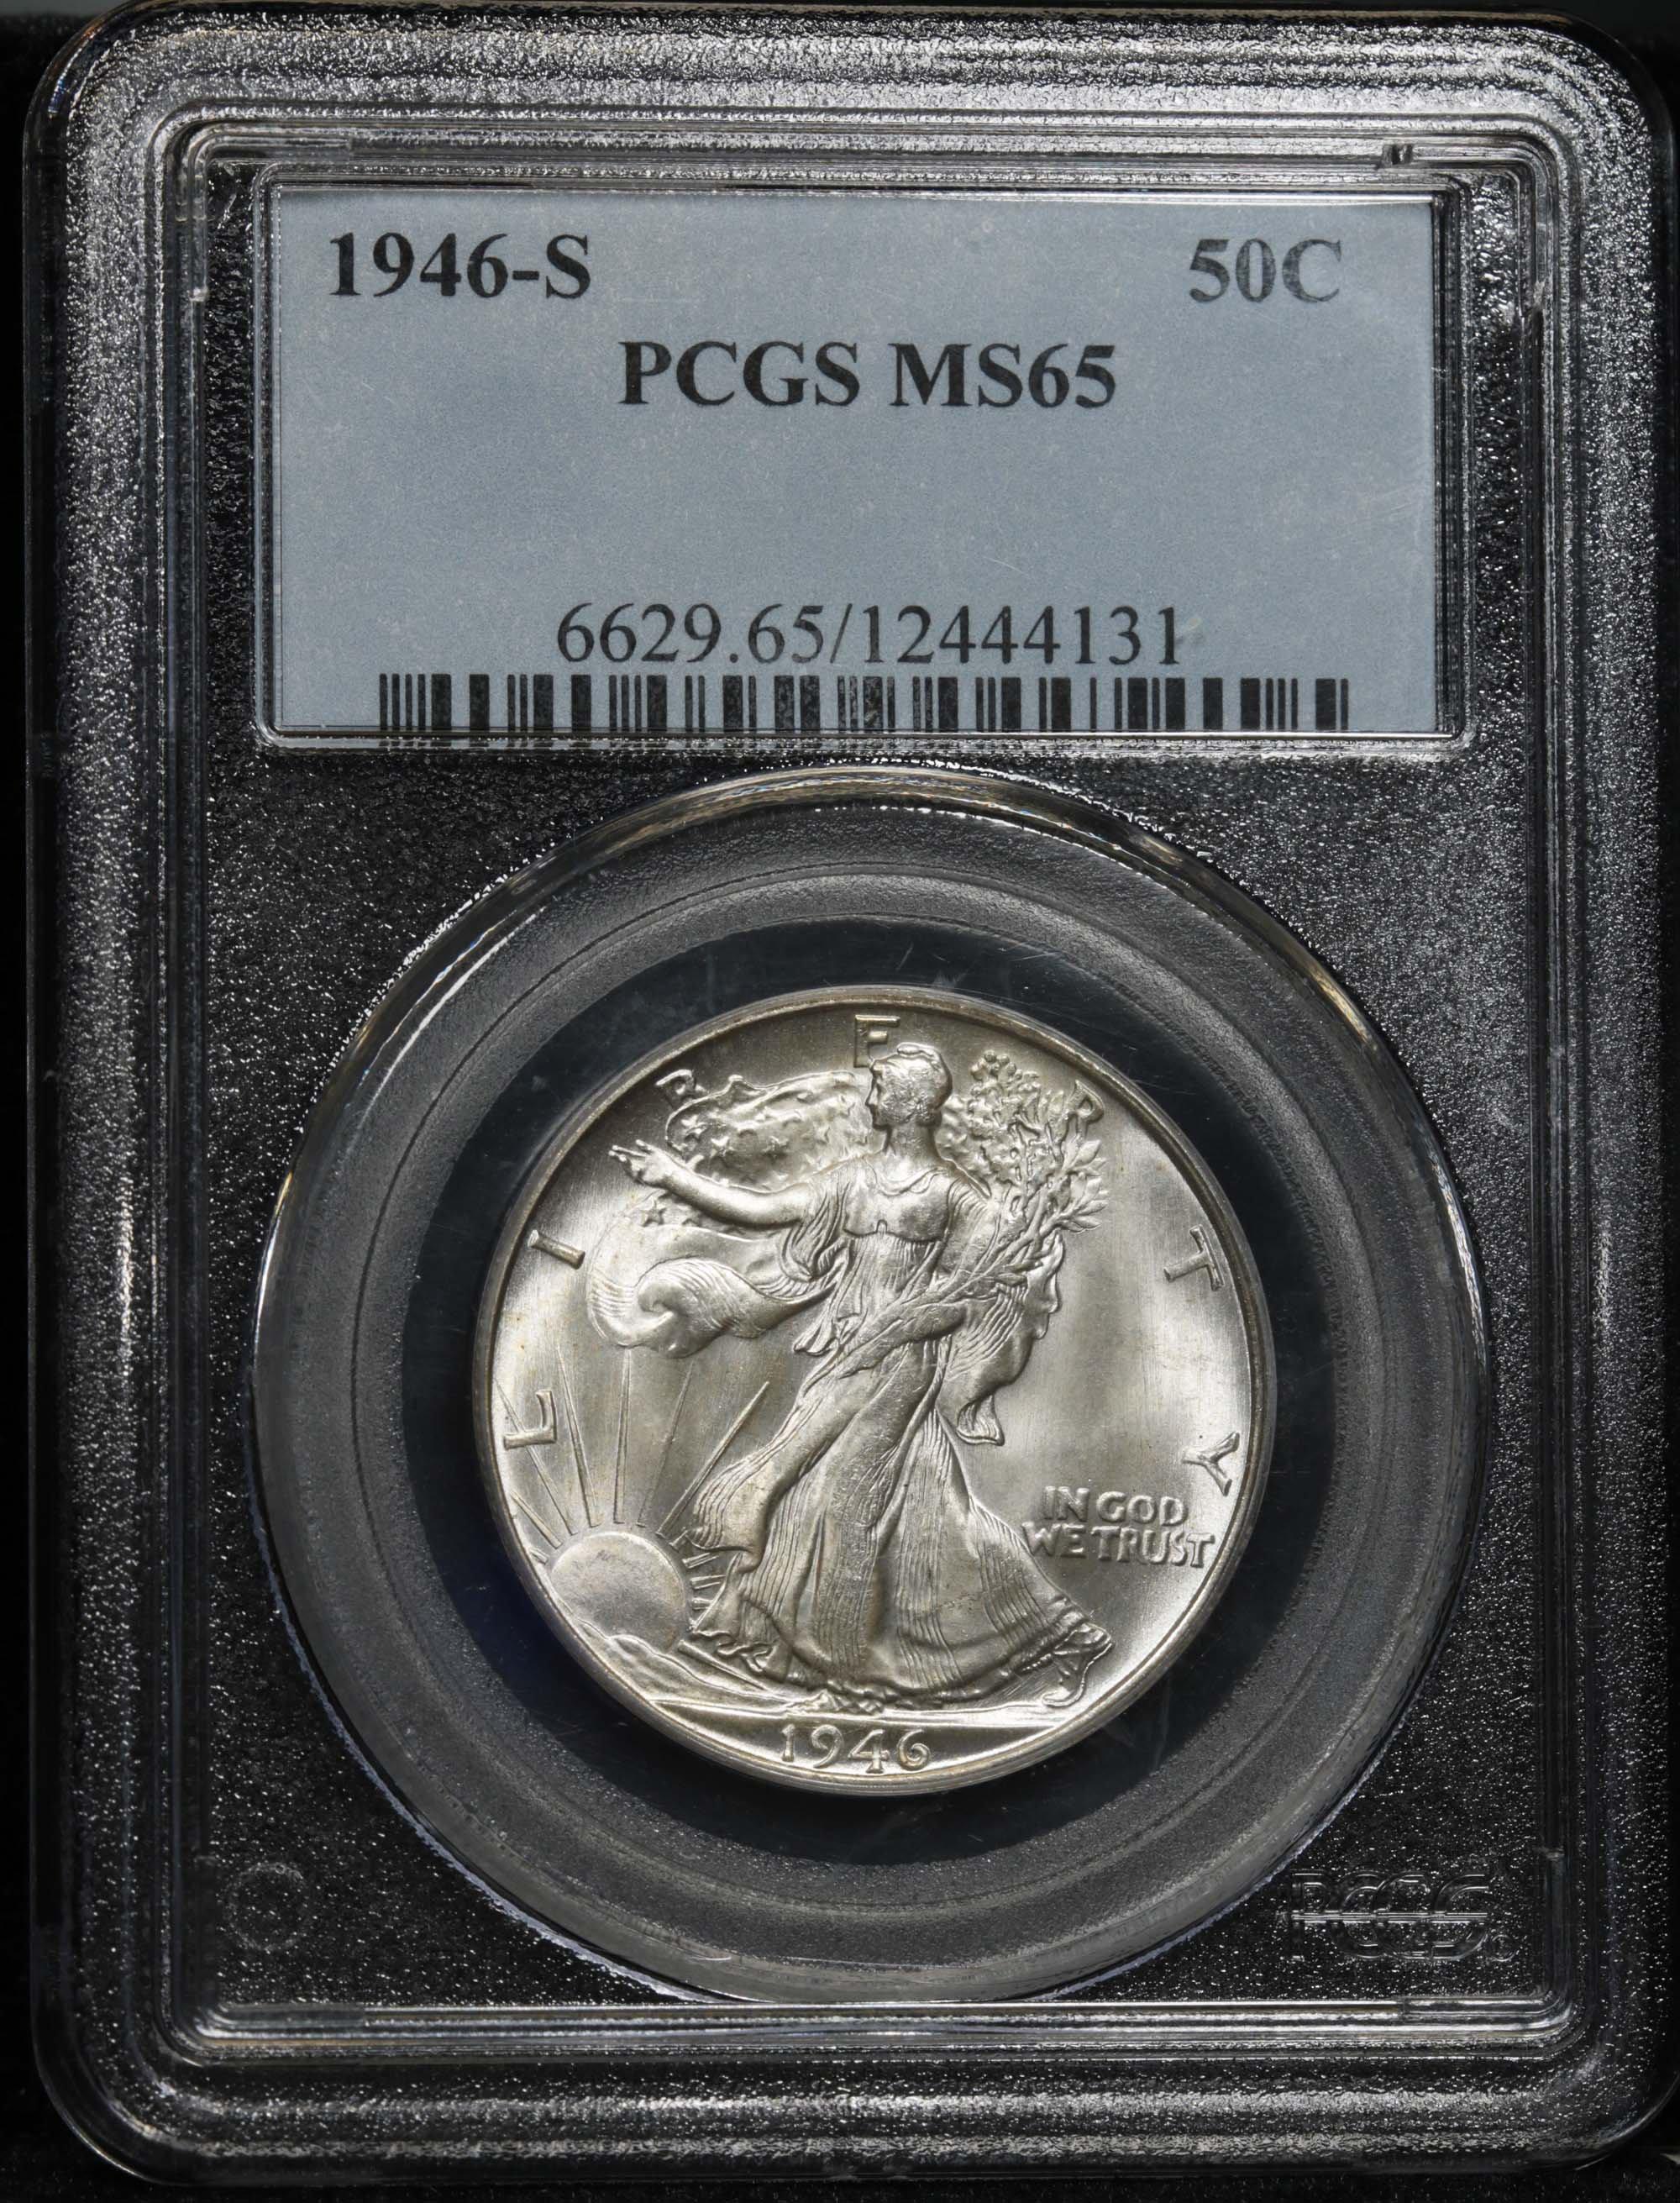 Outstanding PCGS 1946-s Walking Liberty 50c Strong breast feathers Graded ms65 by PCGS PQ for grade